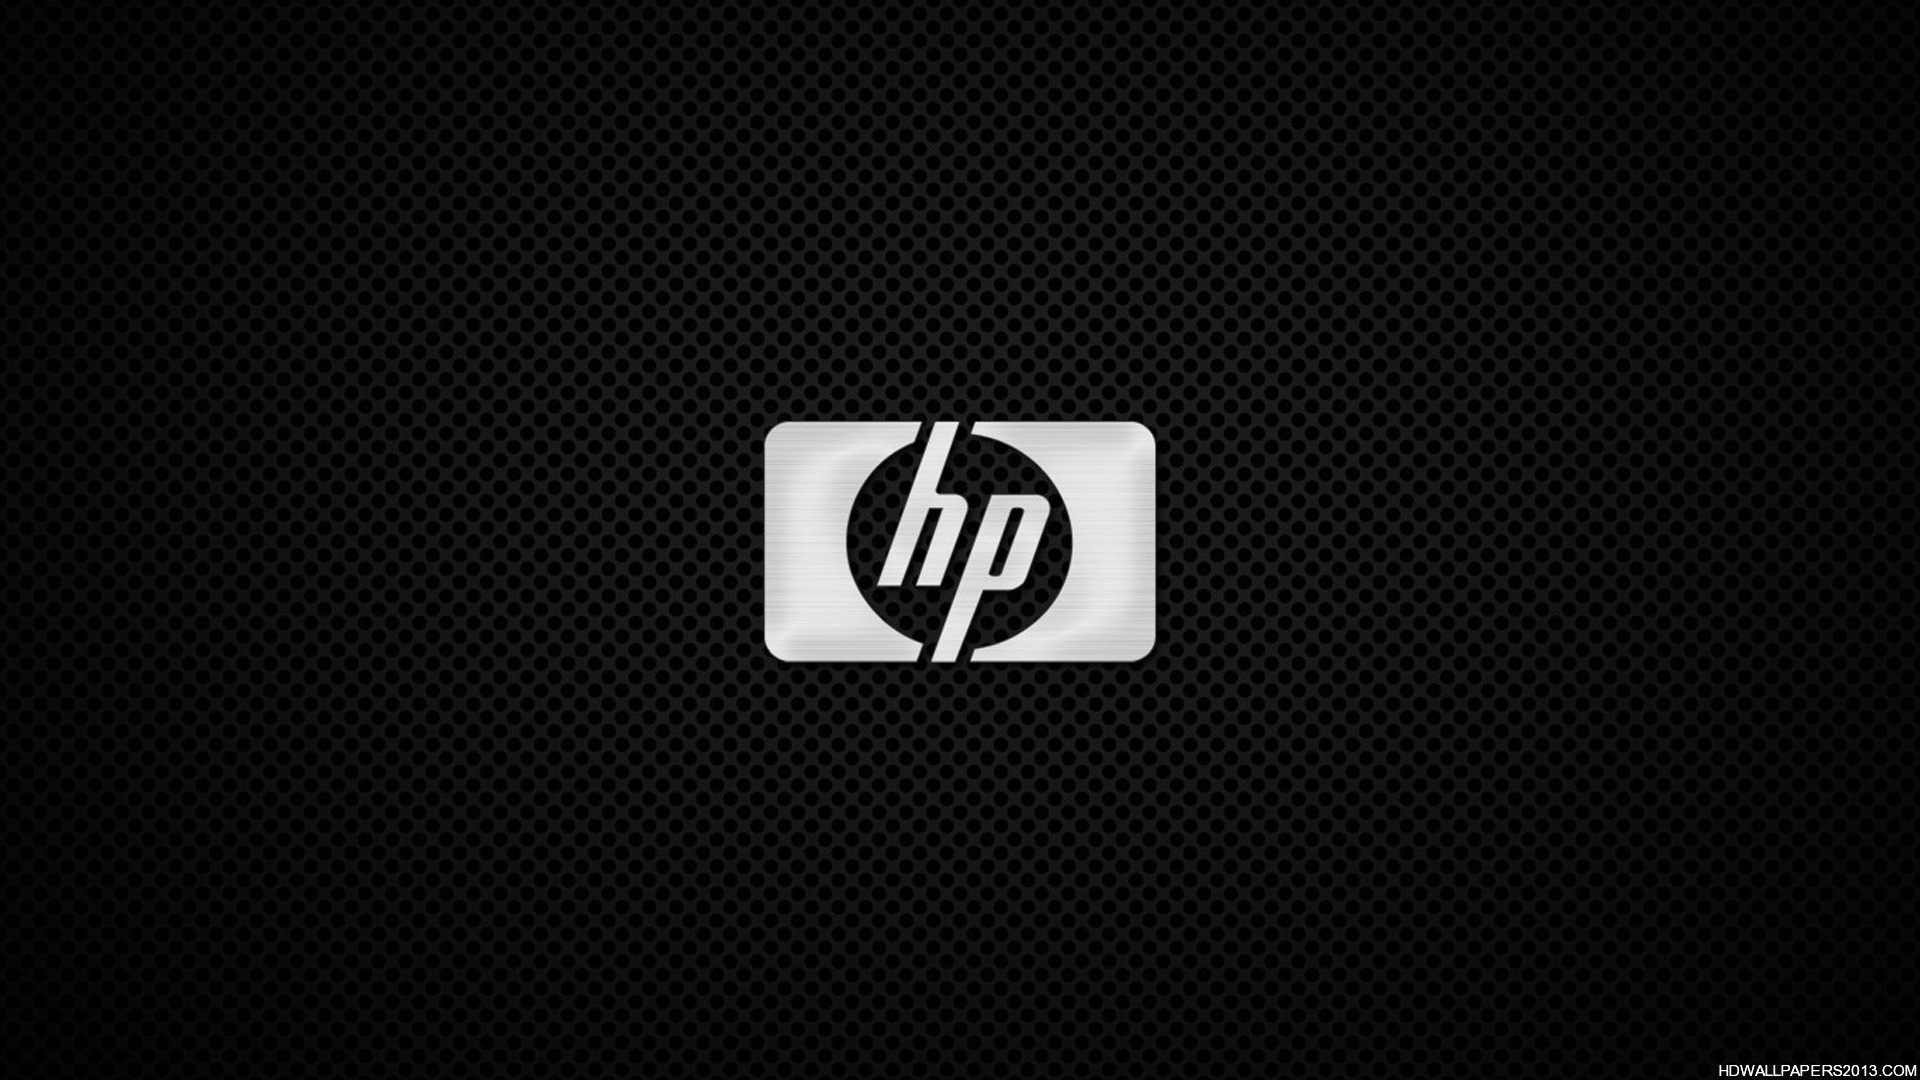 HP Wallpaper for Laptop High Definition Wallpapers High Definition